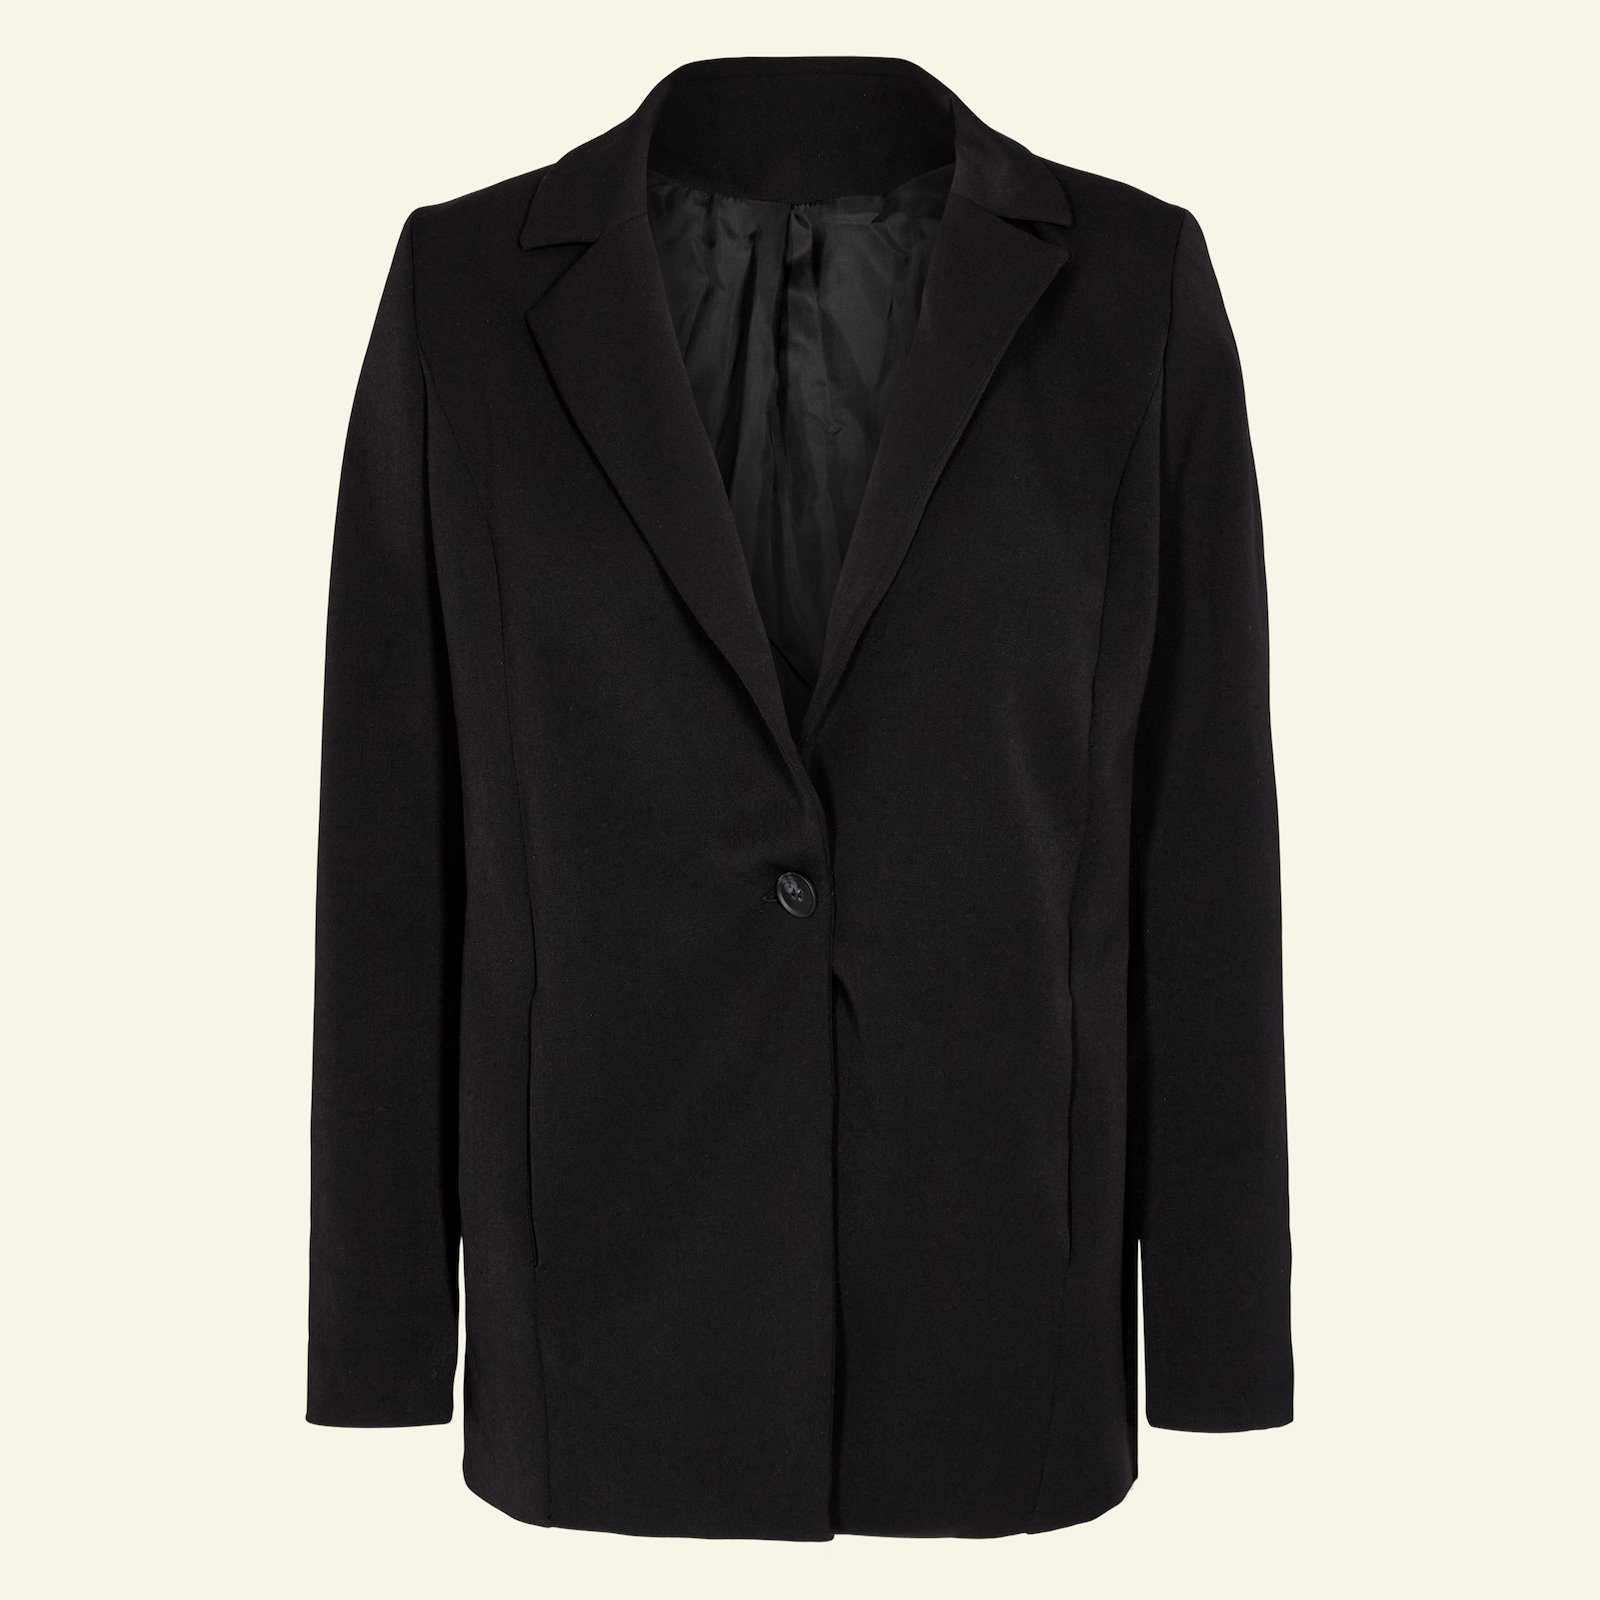 Suit jacket with lining, 40/12 p24048_460563_5043_40237_sskit